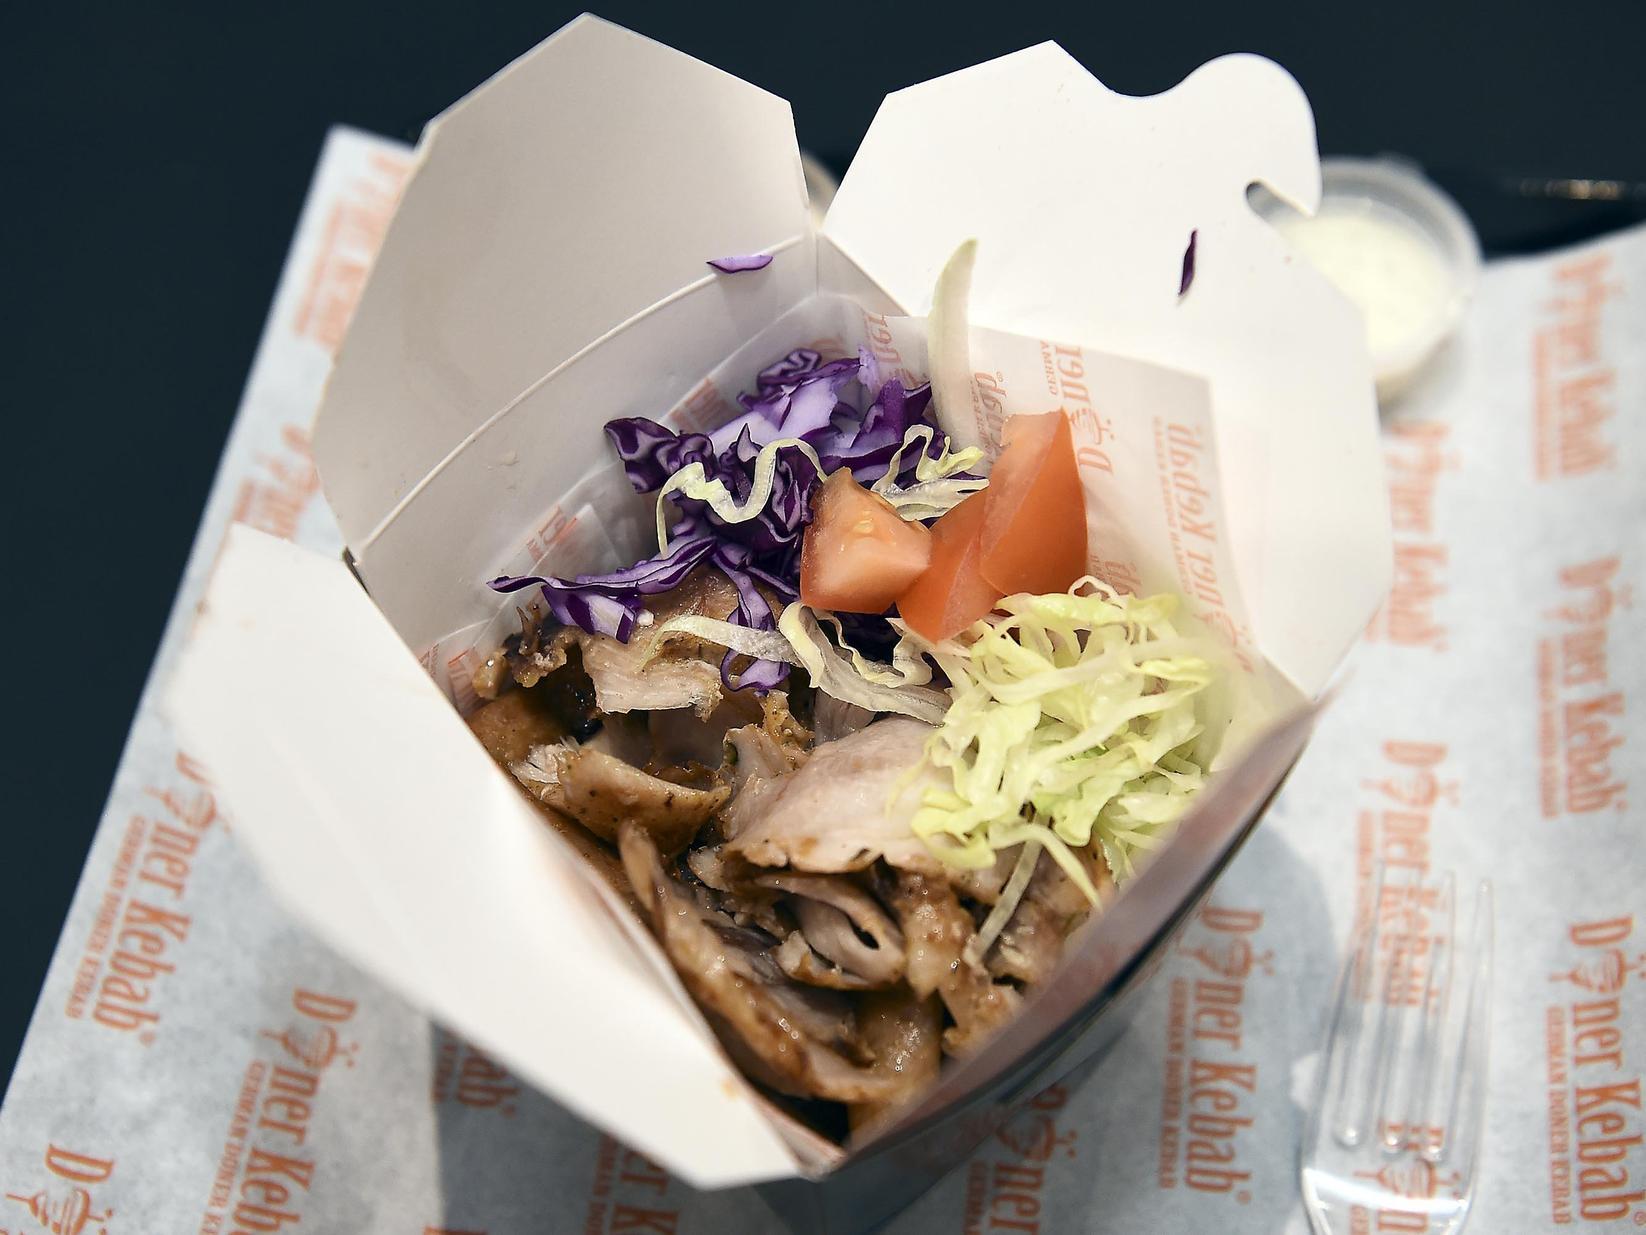 Doner boxes include a gym box which contains up to 44g of protein.